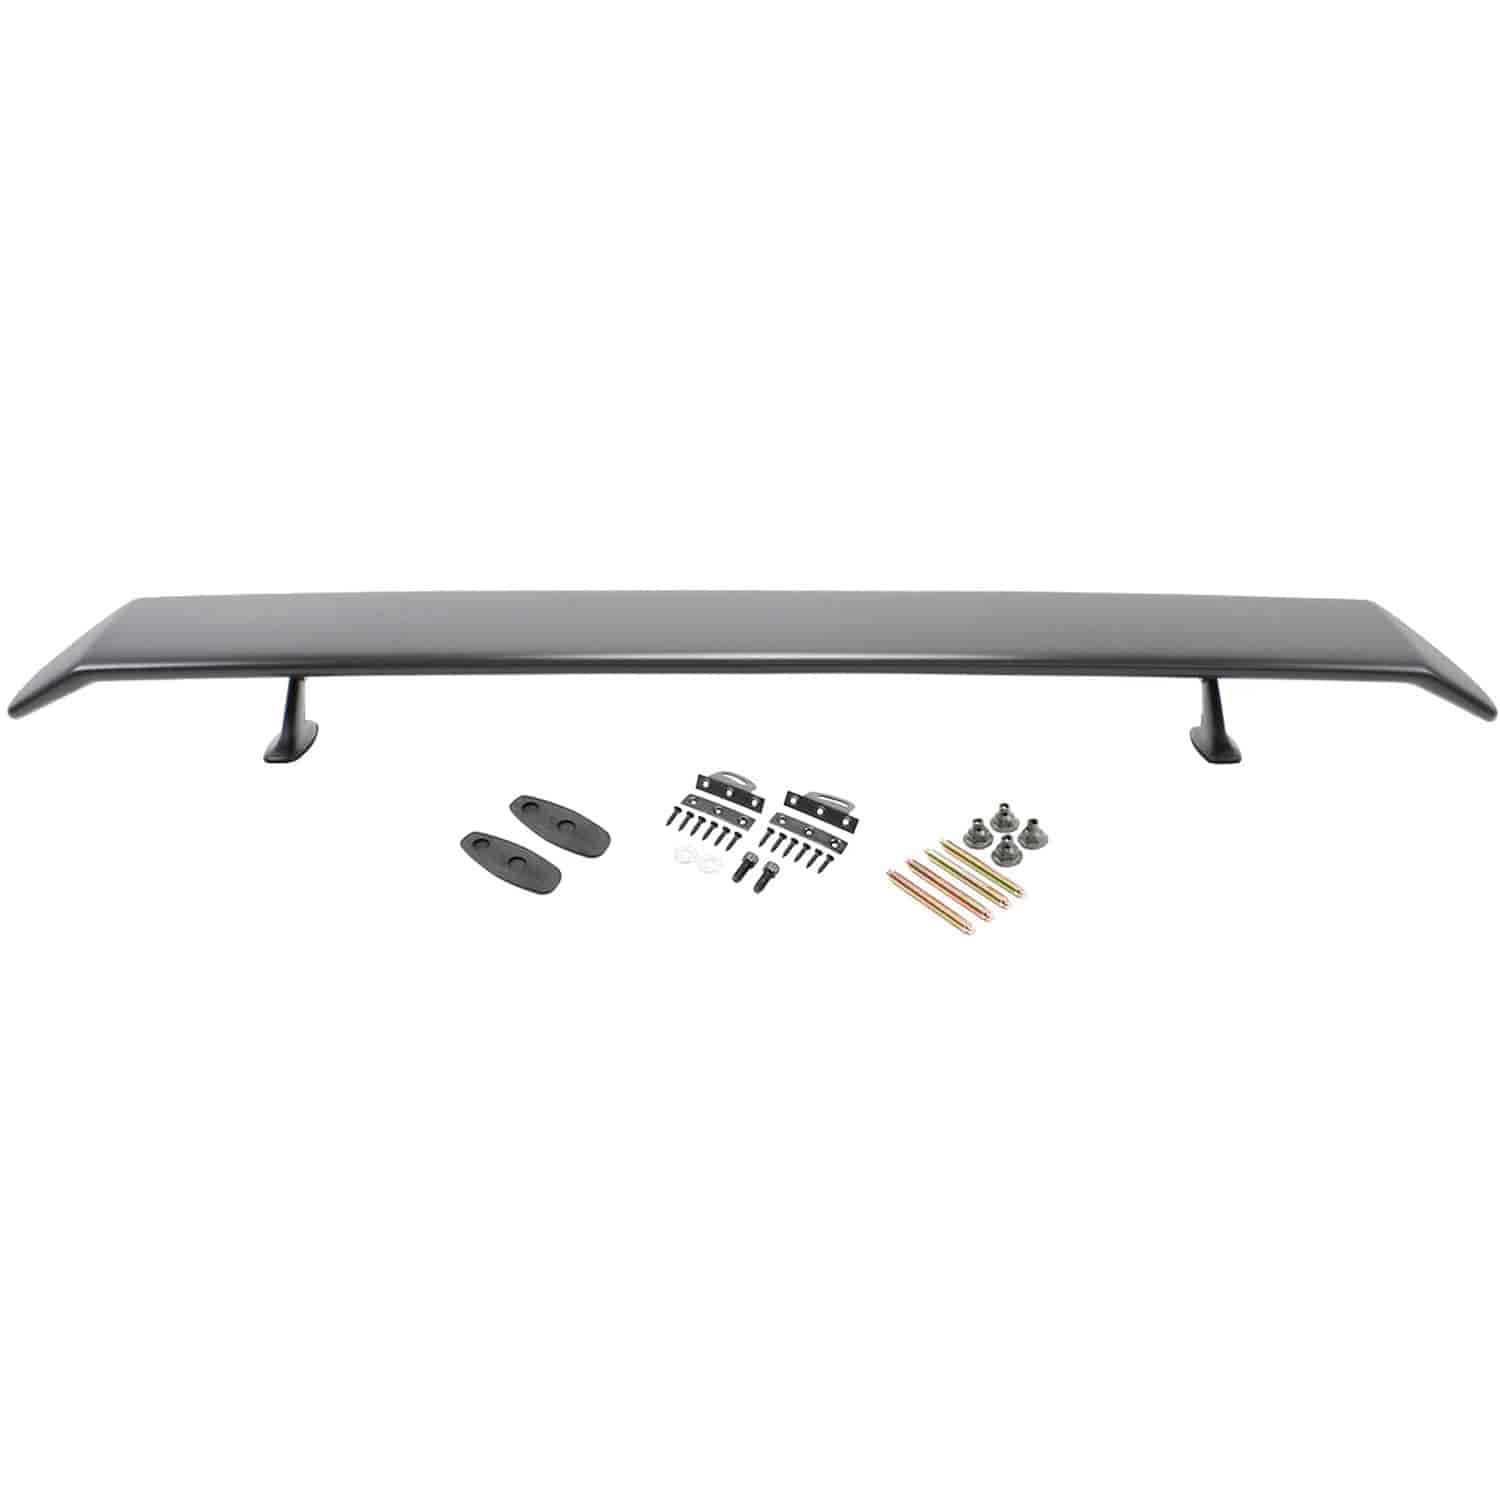 69 Mustang Rear Wing Value Spoiler Complete Kit